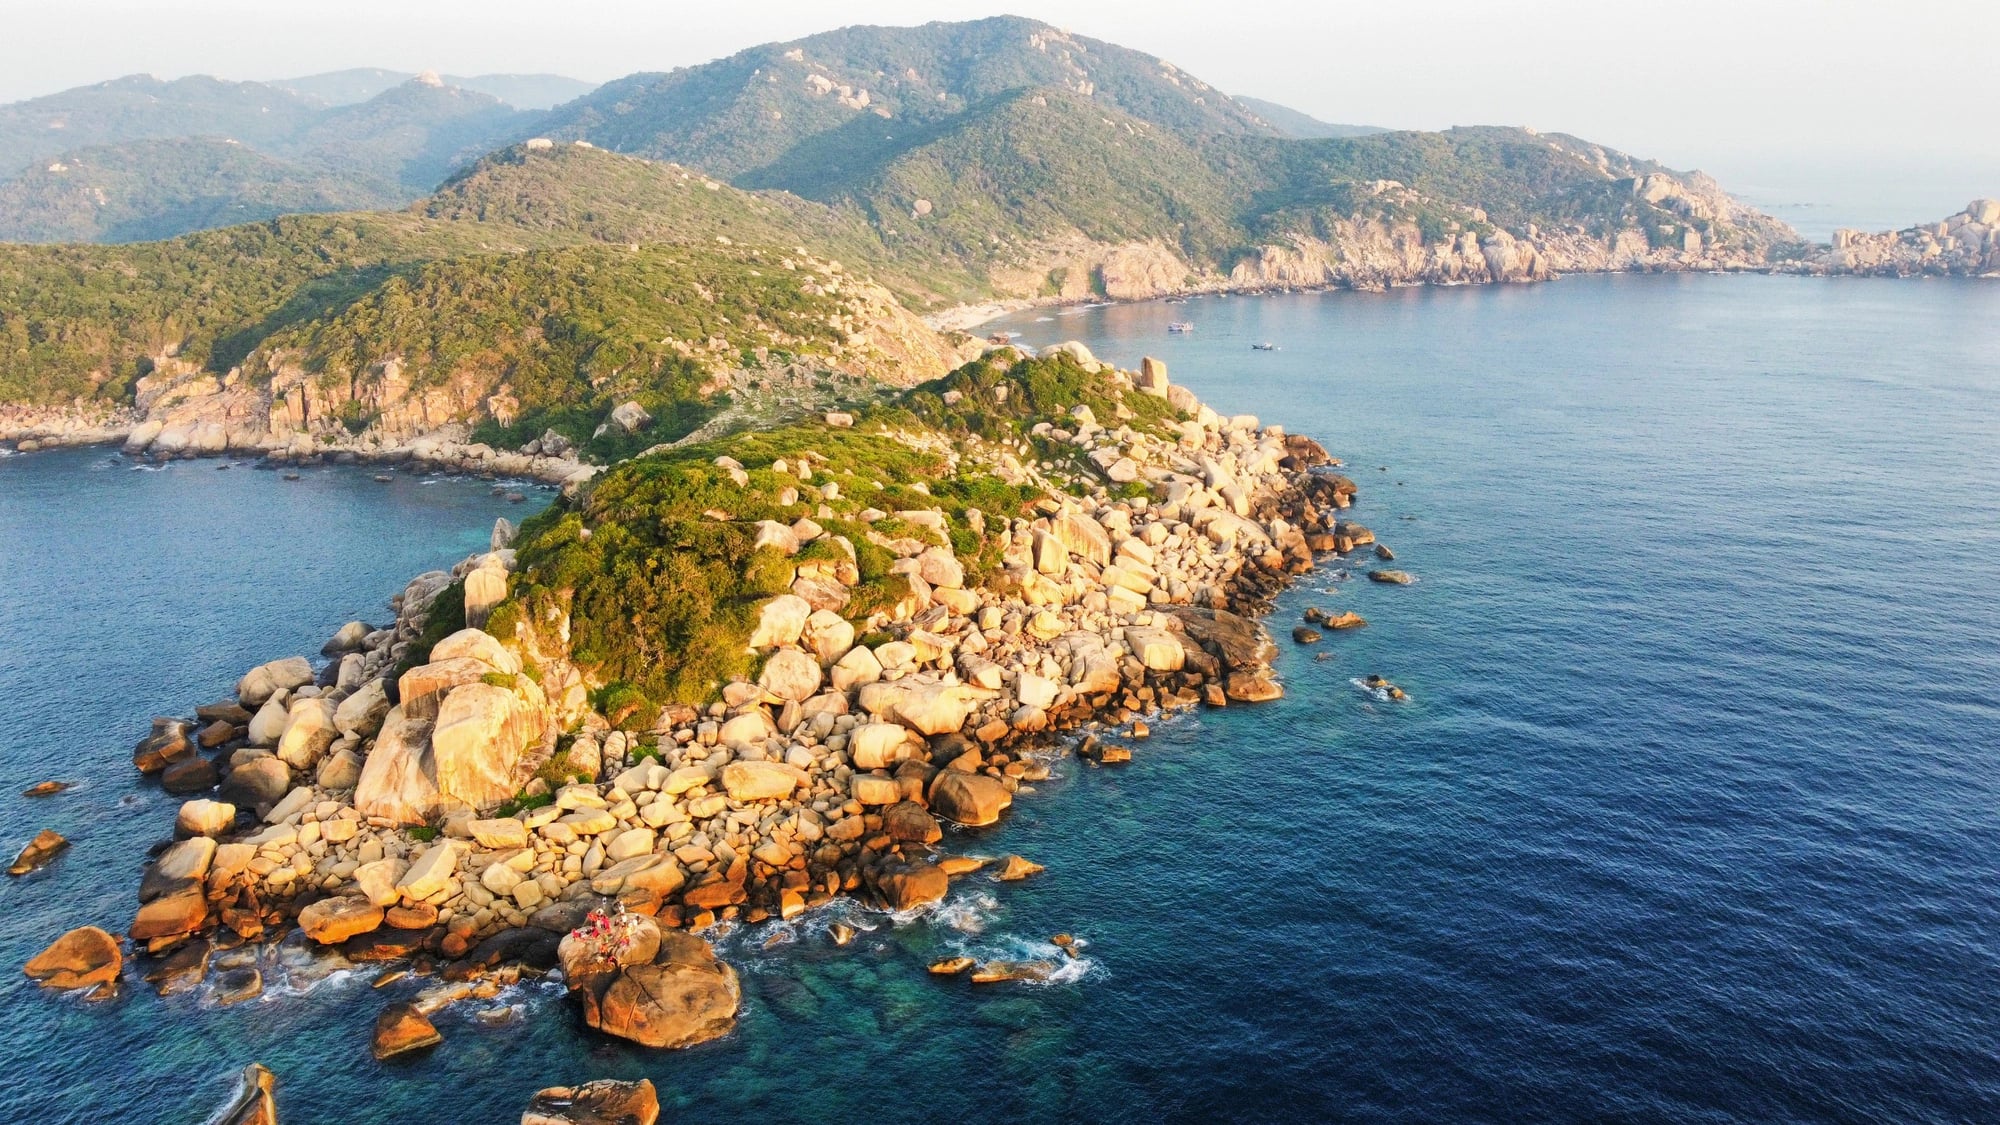 Mui Doi (Doi Cape), located on Hon Gom peninsula in Van Thanh Commune, Van Ninh District in the central province of Khanh Hoa, is the easternmost point on the mainland of Vietnam. Photo: Tran Hoai